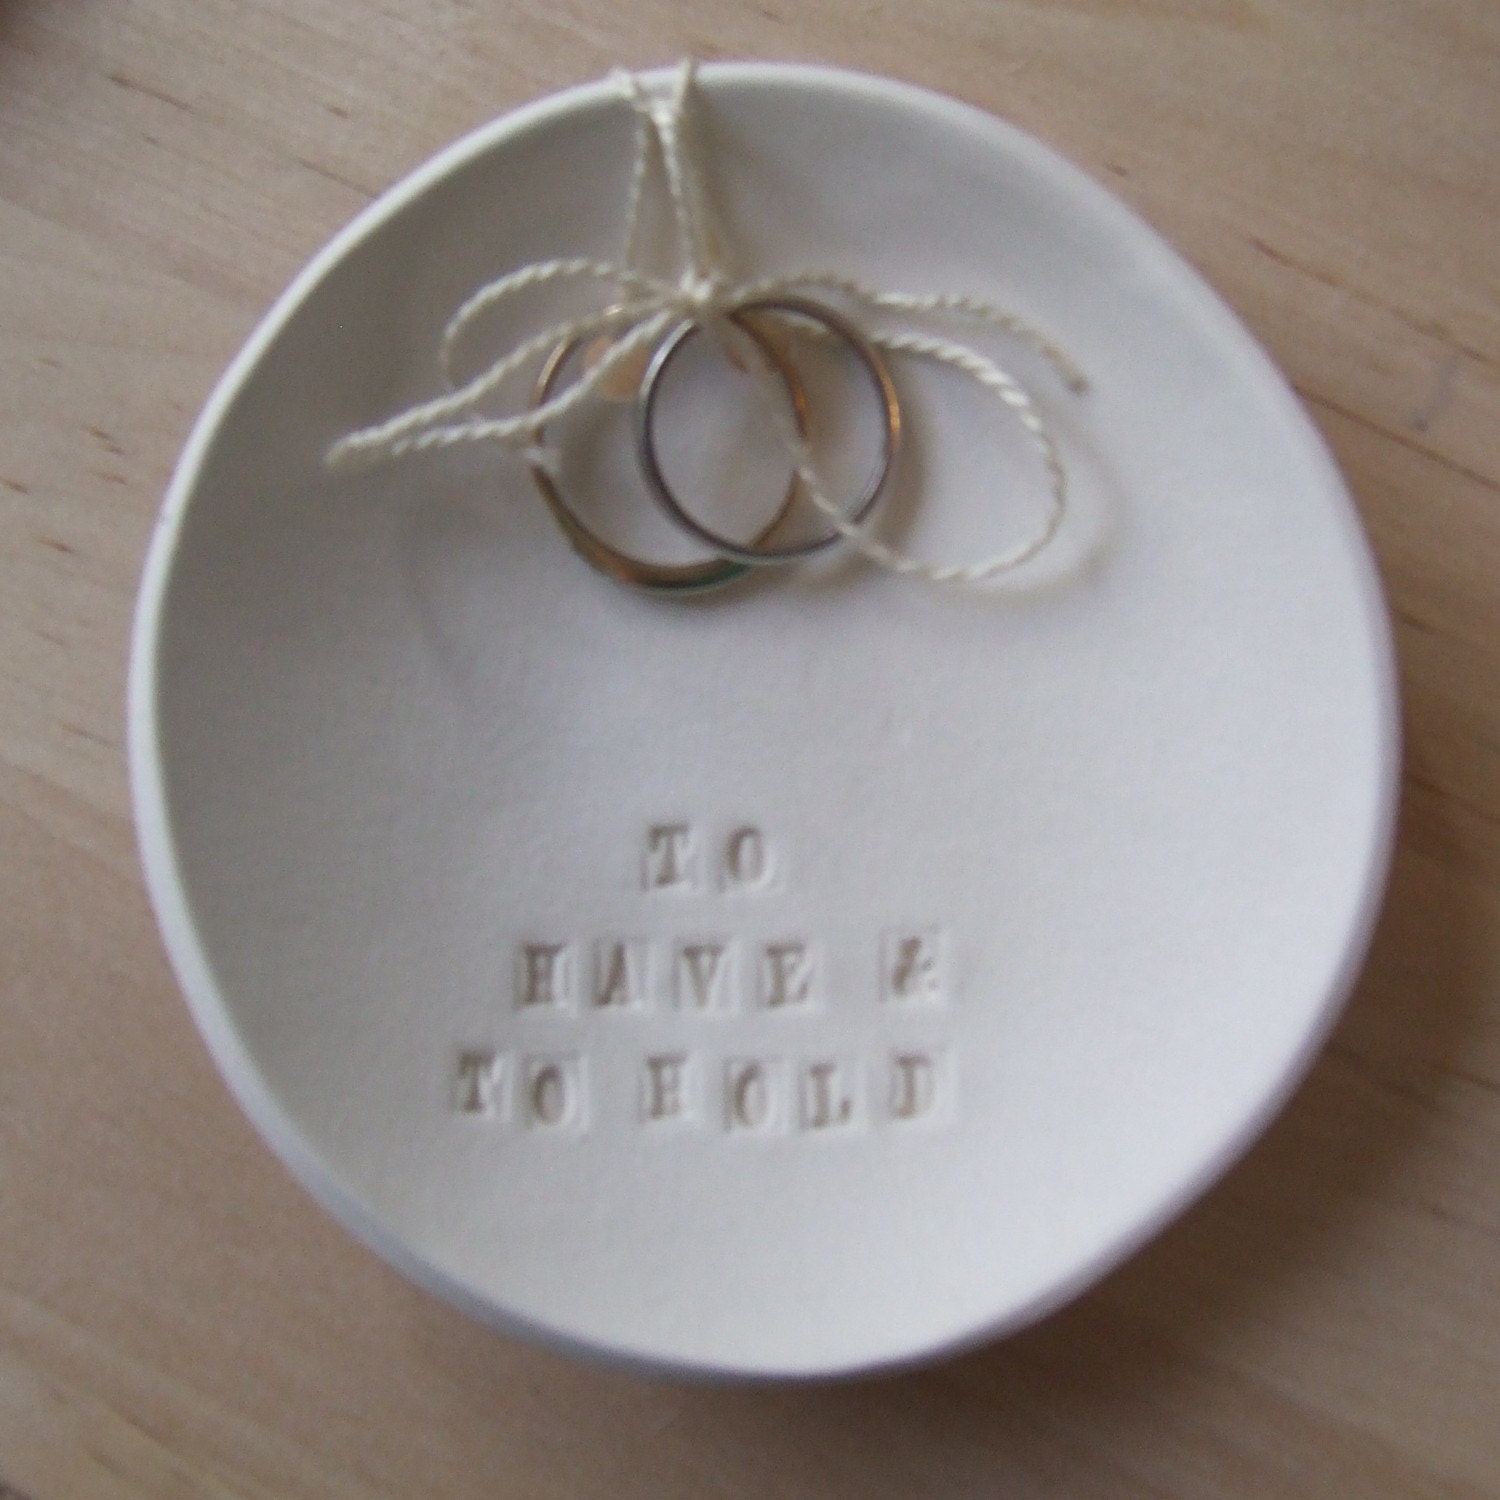 TO HAVE AND TO HOLD tiny text bowl for rings